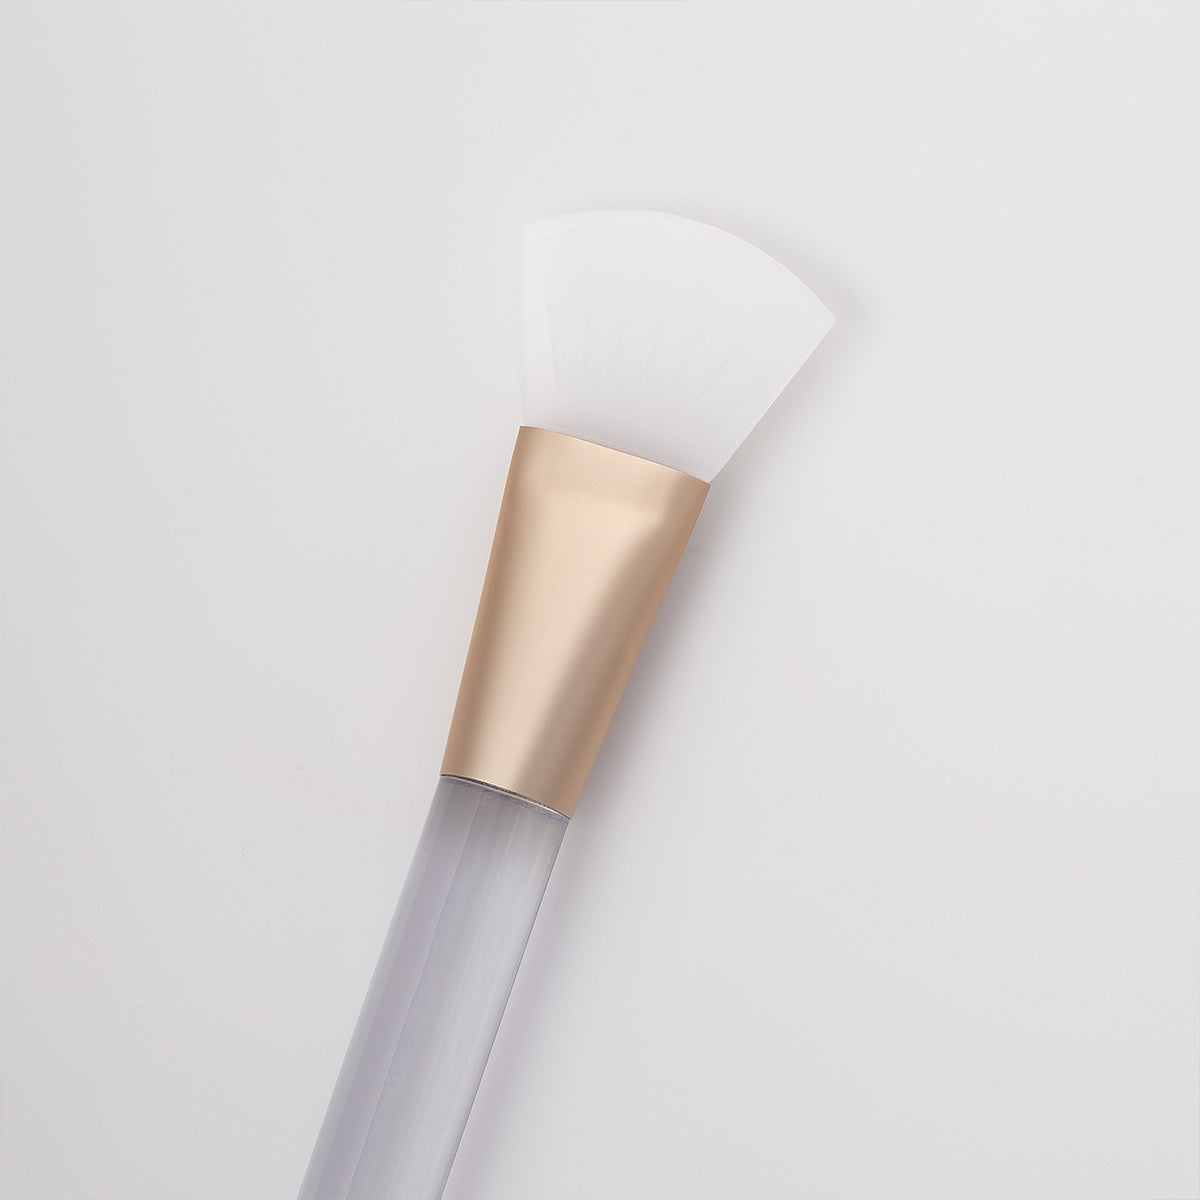 Silicone Face Mask Brush | Product Detail Image | Uncommon Beauty